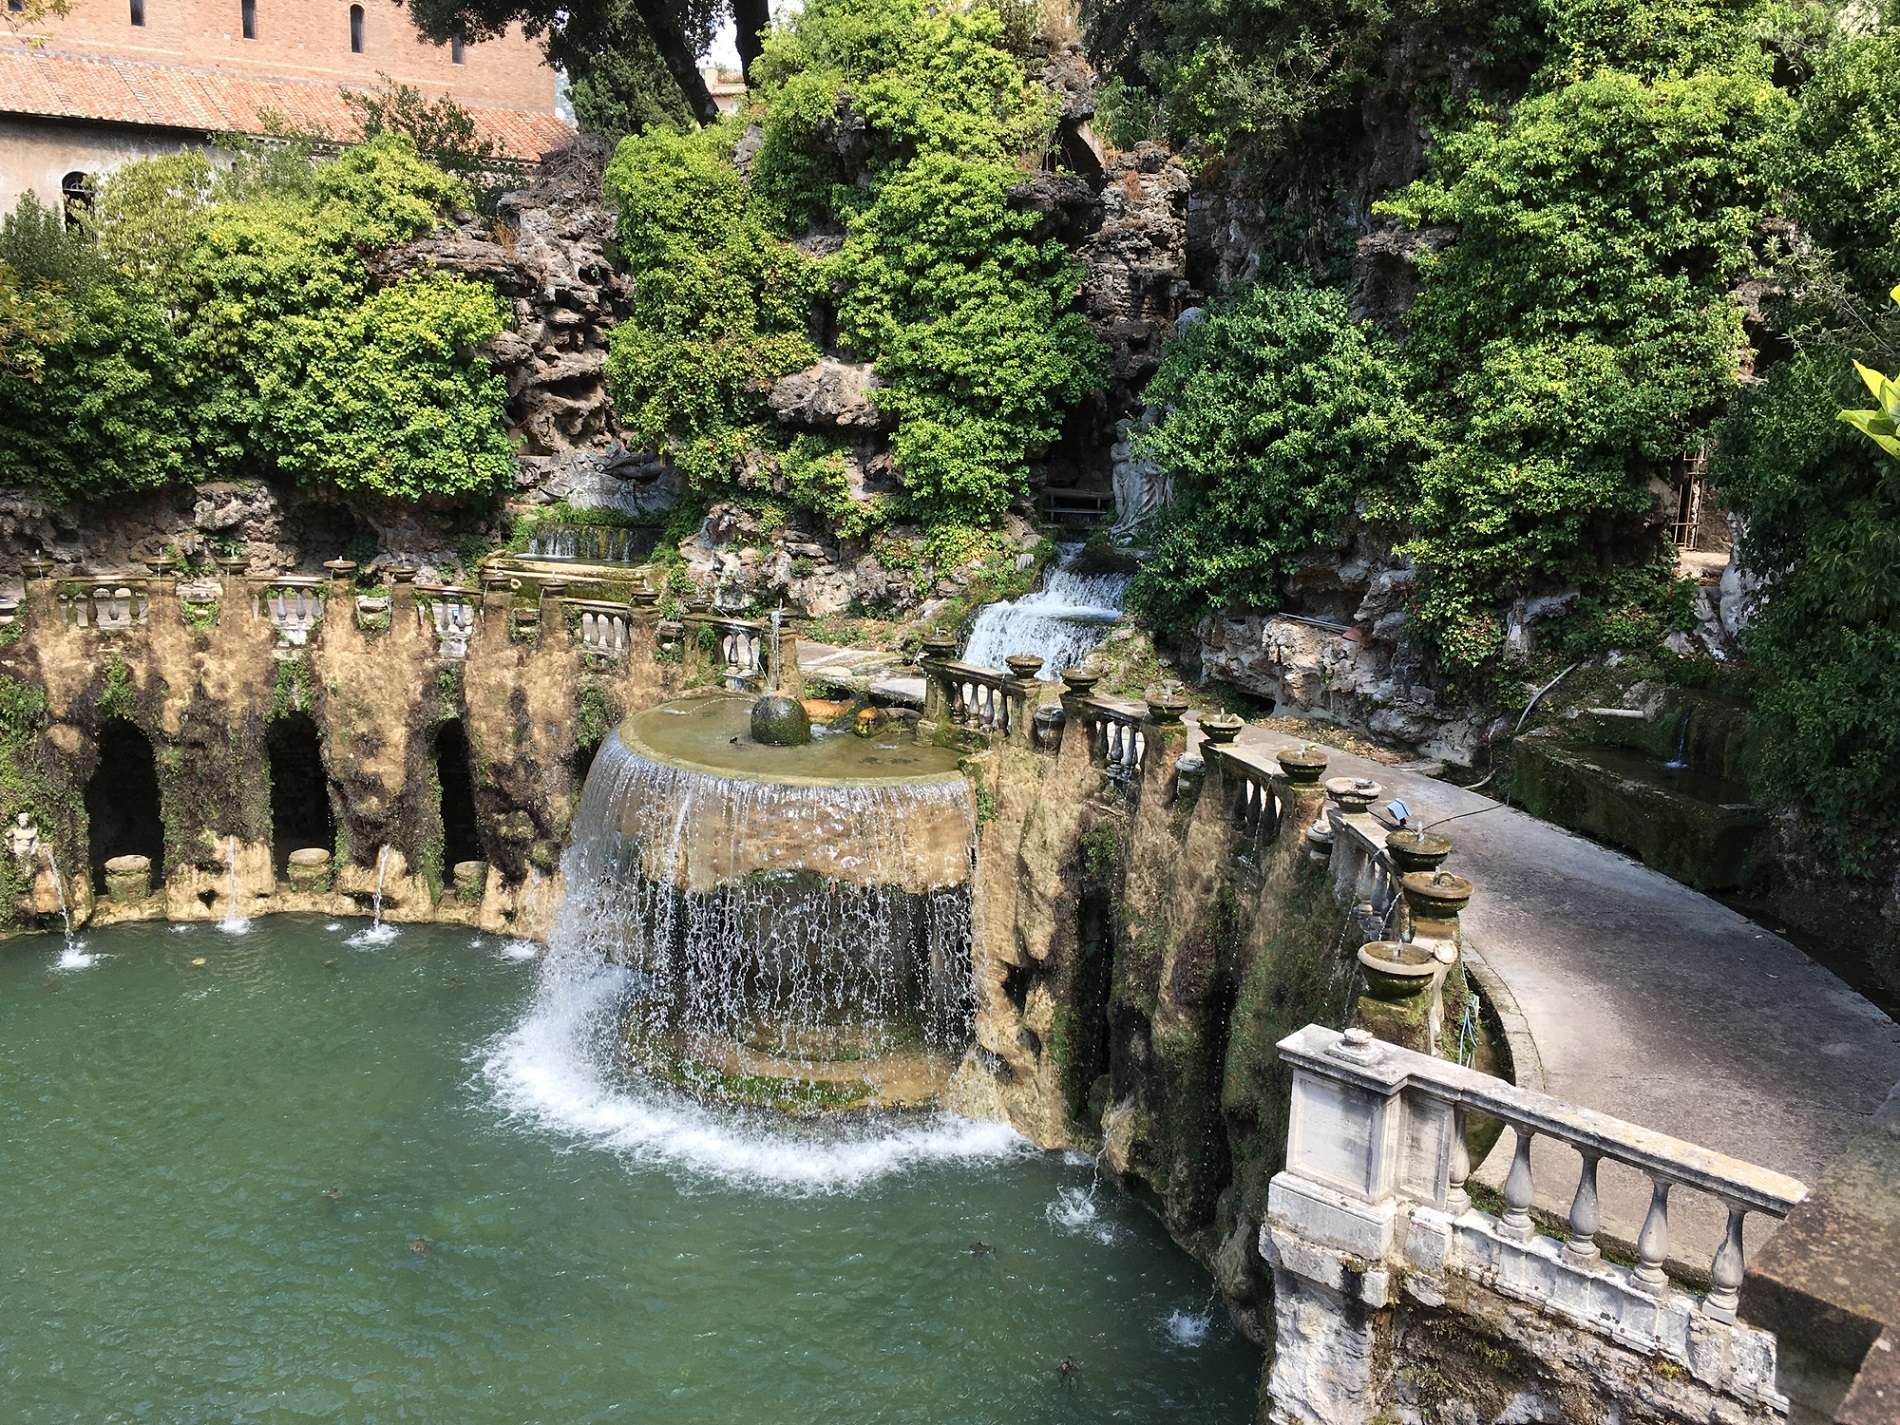 View of the The Oval Fountain (Fontana dell'Ovato) and statue of the Sibyl Albunensa viewed from the terrace above. Looking down on the Oval Fountain in the terraced gardens of Villa d'Este in Tivloli